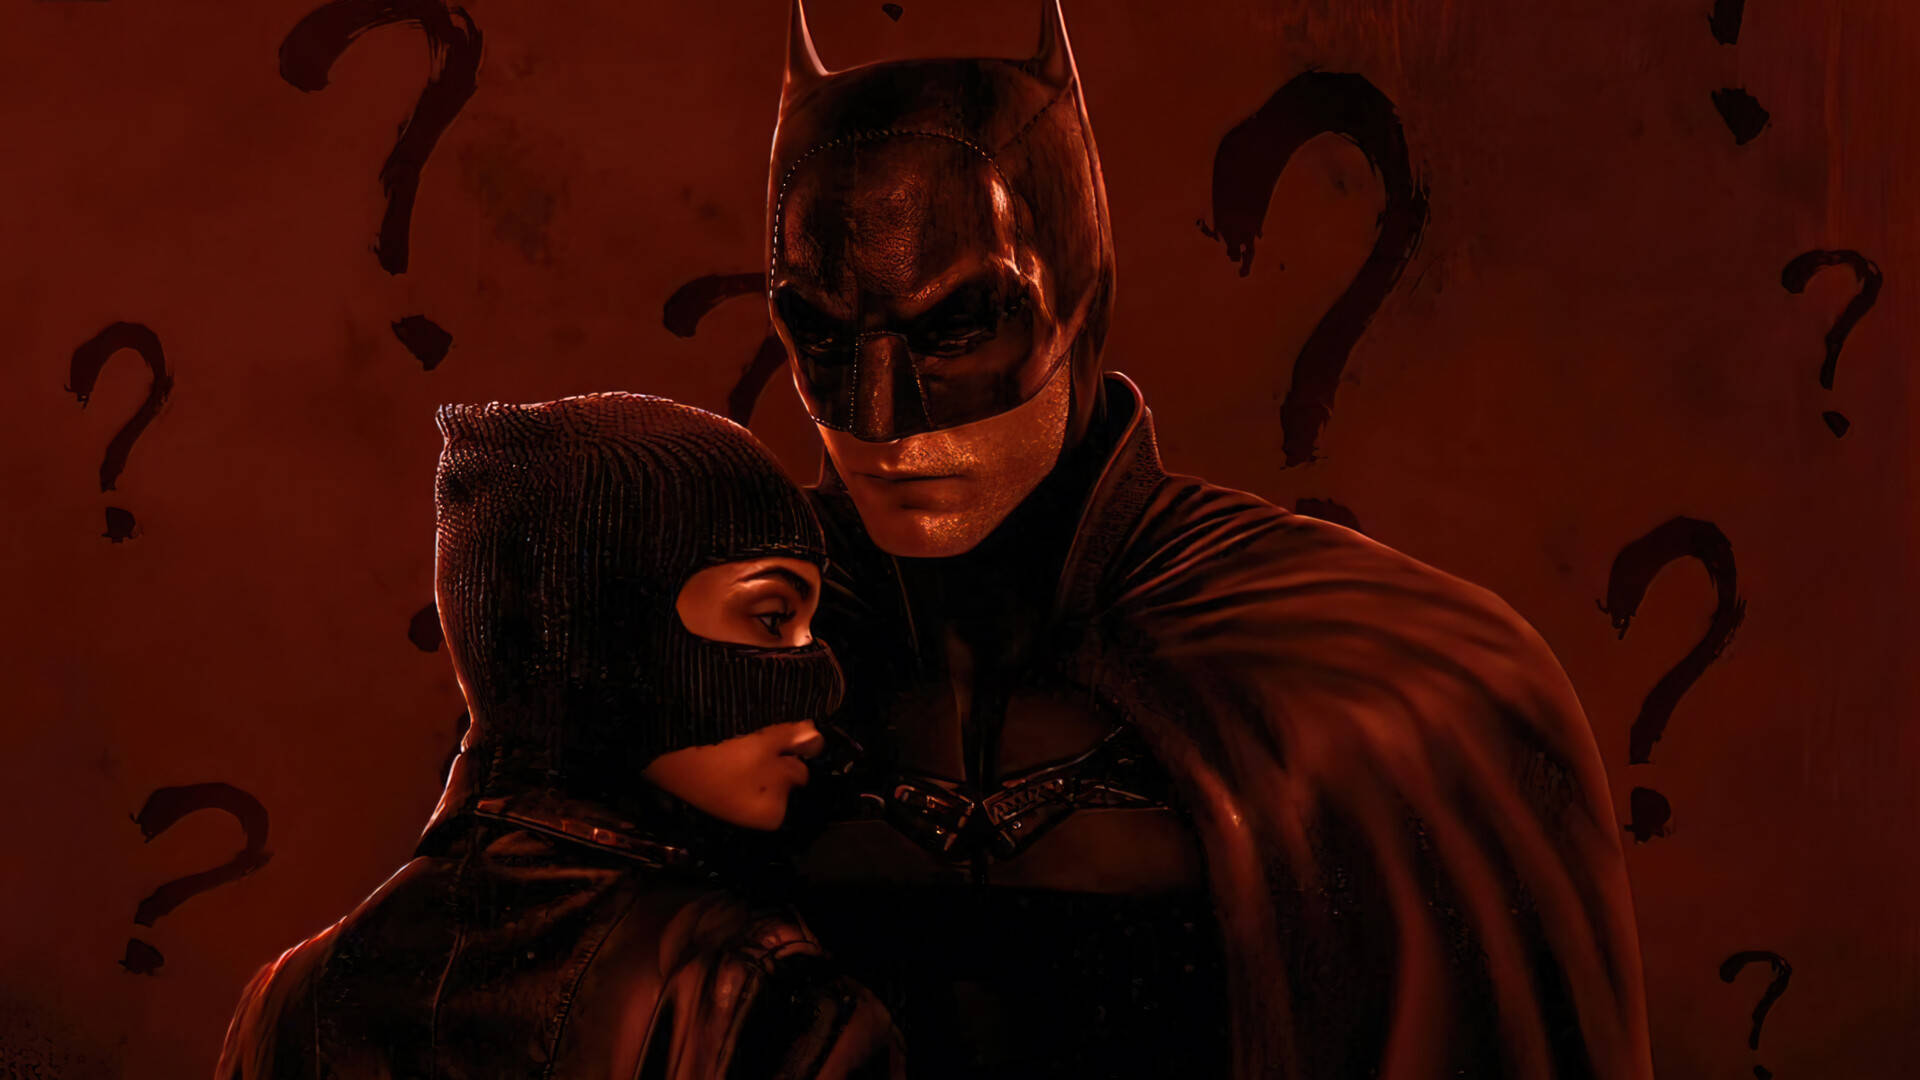 The Batman And Catwoman In Red Wallpaper